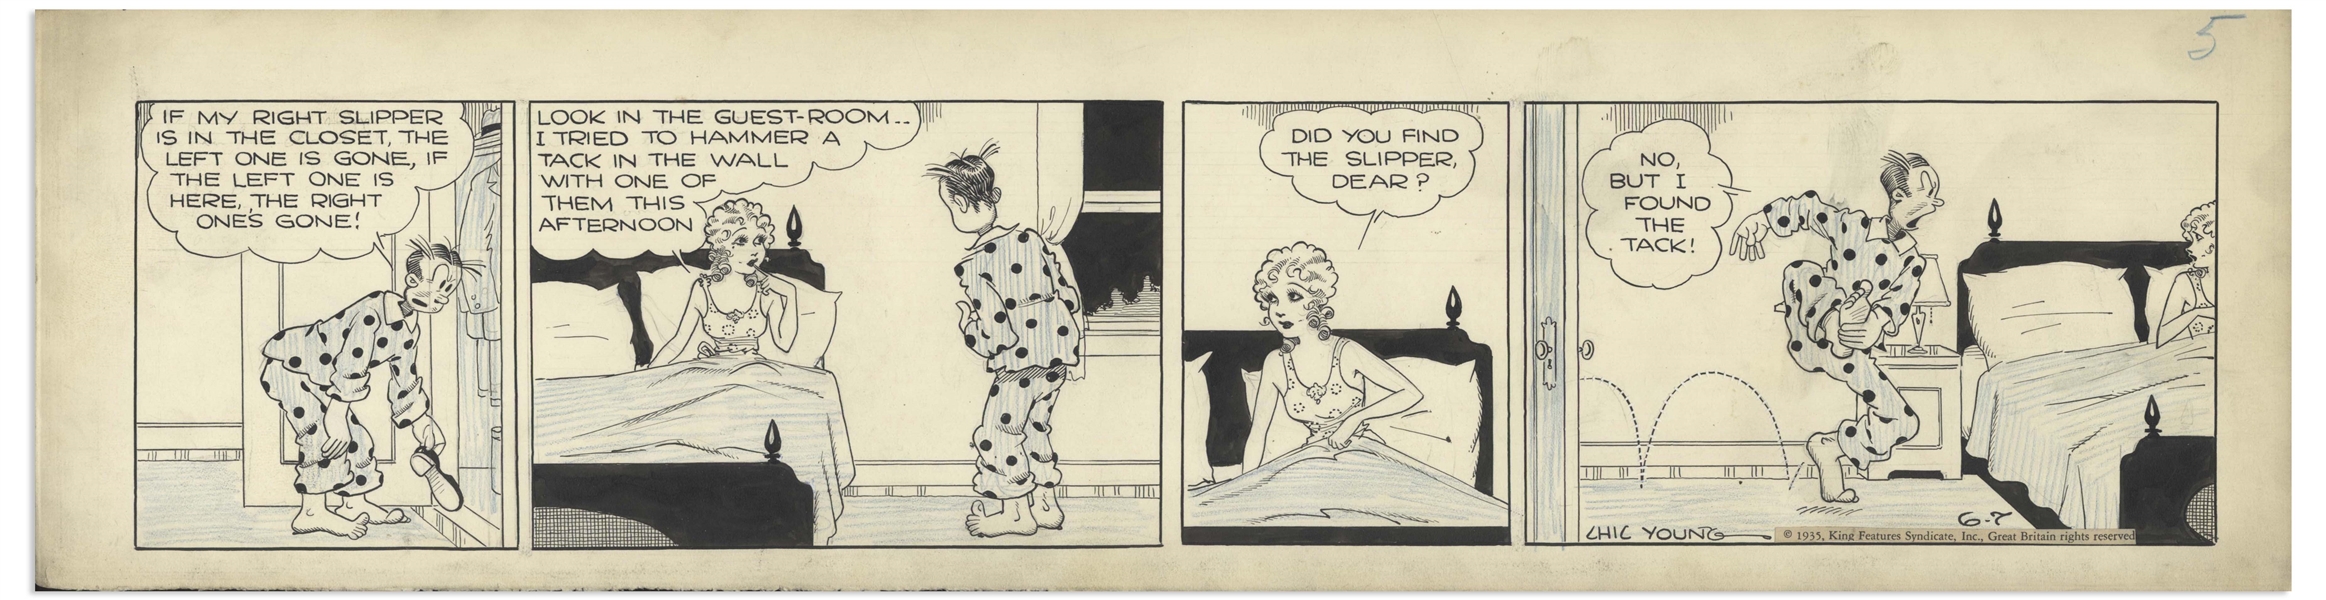 Chic Young Hand-Drawn ''Blondie'' Comic Strip From 1935 Titled ''A Regular Bloodhound'' -- Blondie Uses Dagwood's Slipper for a Hammer